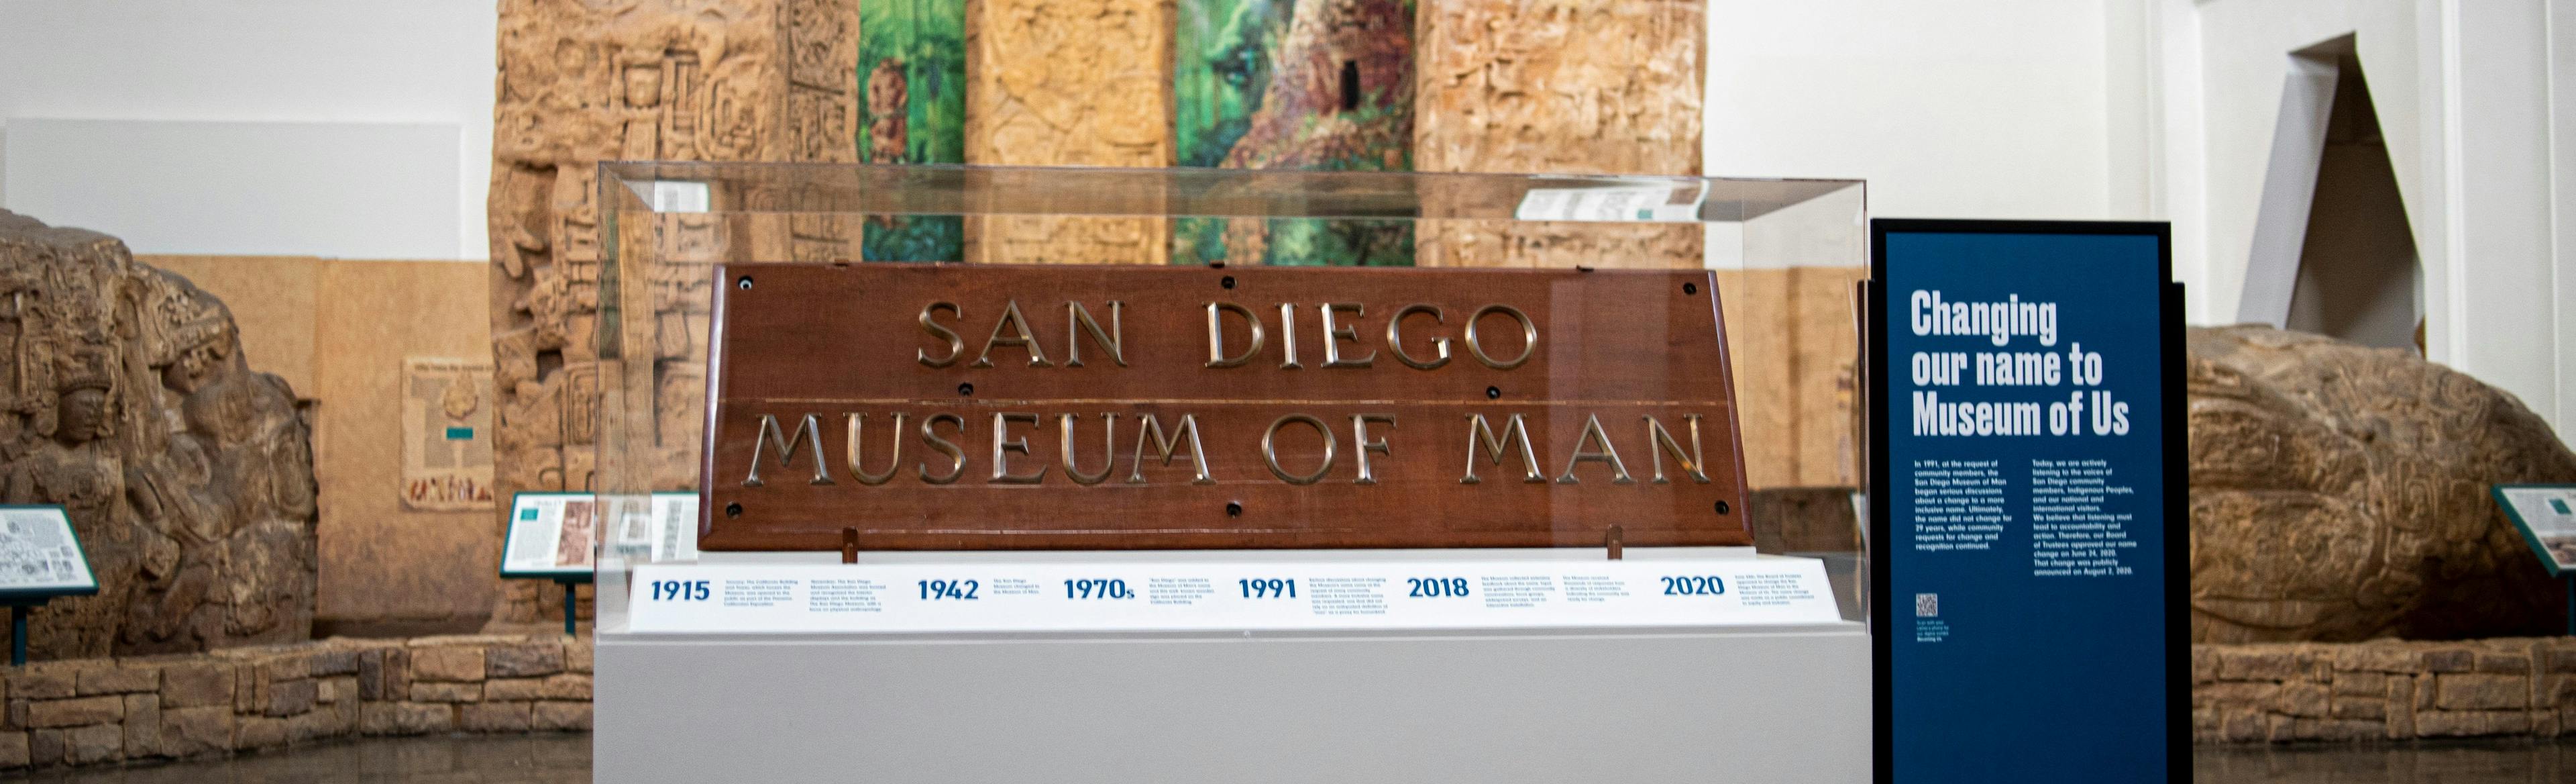 The wooden "San Diego Museum of Man" sign with brass letters sits within a plexiglass case. Underneath it, is a timeline with historic dates for the museum. To the right a blue standing sign reads, "Changing our name to Museum of Us." The whole installation stands before the Museum's "Maya Peoples: Heart of Sky, Heart of Earth" exhibit and three Maya stelae monuments.